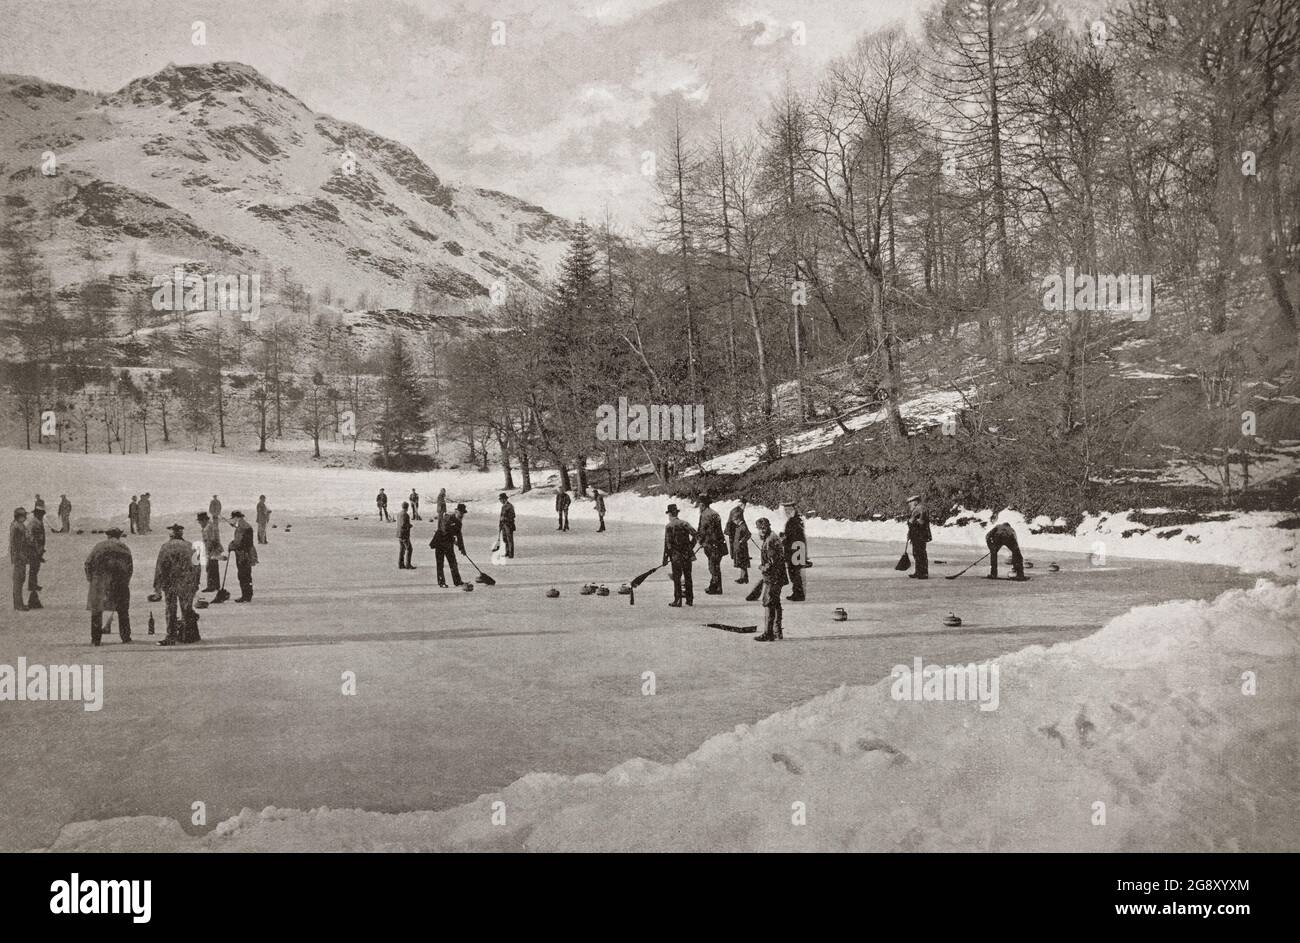 A late 19th century view of men playing curling in Birnam, a village in Perth and Kinross, Scotland. A favourite game in Scotland, curling is a sport in which two teams, each with four players, take turns sliding heavy, polished granite stones, across the ice toward a circular target marked on the ice. The path of the rock may be further influenced by two sweepers with brooms or brushes, who a sweep the ice in front of the stone decreasing the friction, which makes the stone travel a straighter path (with less 'curl') and a longer distance. Stock Photo